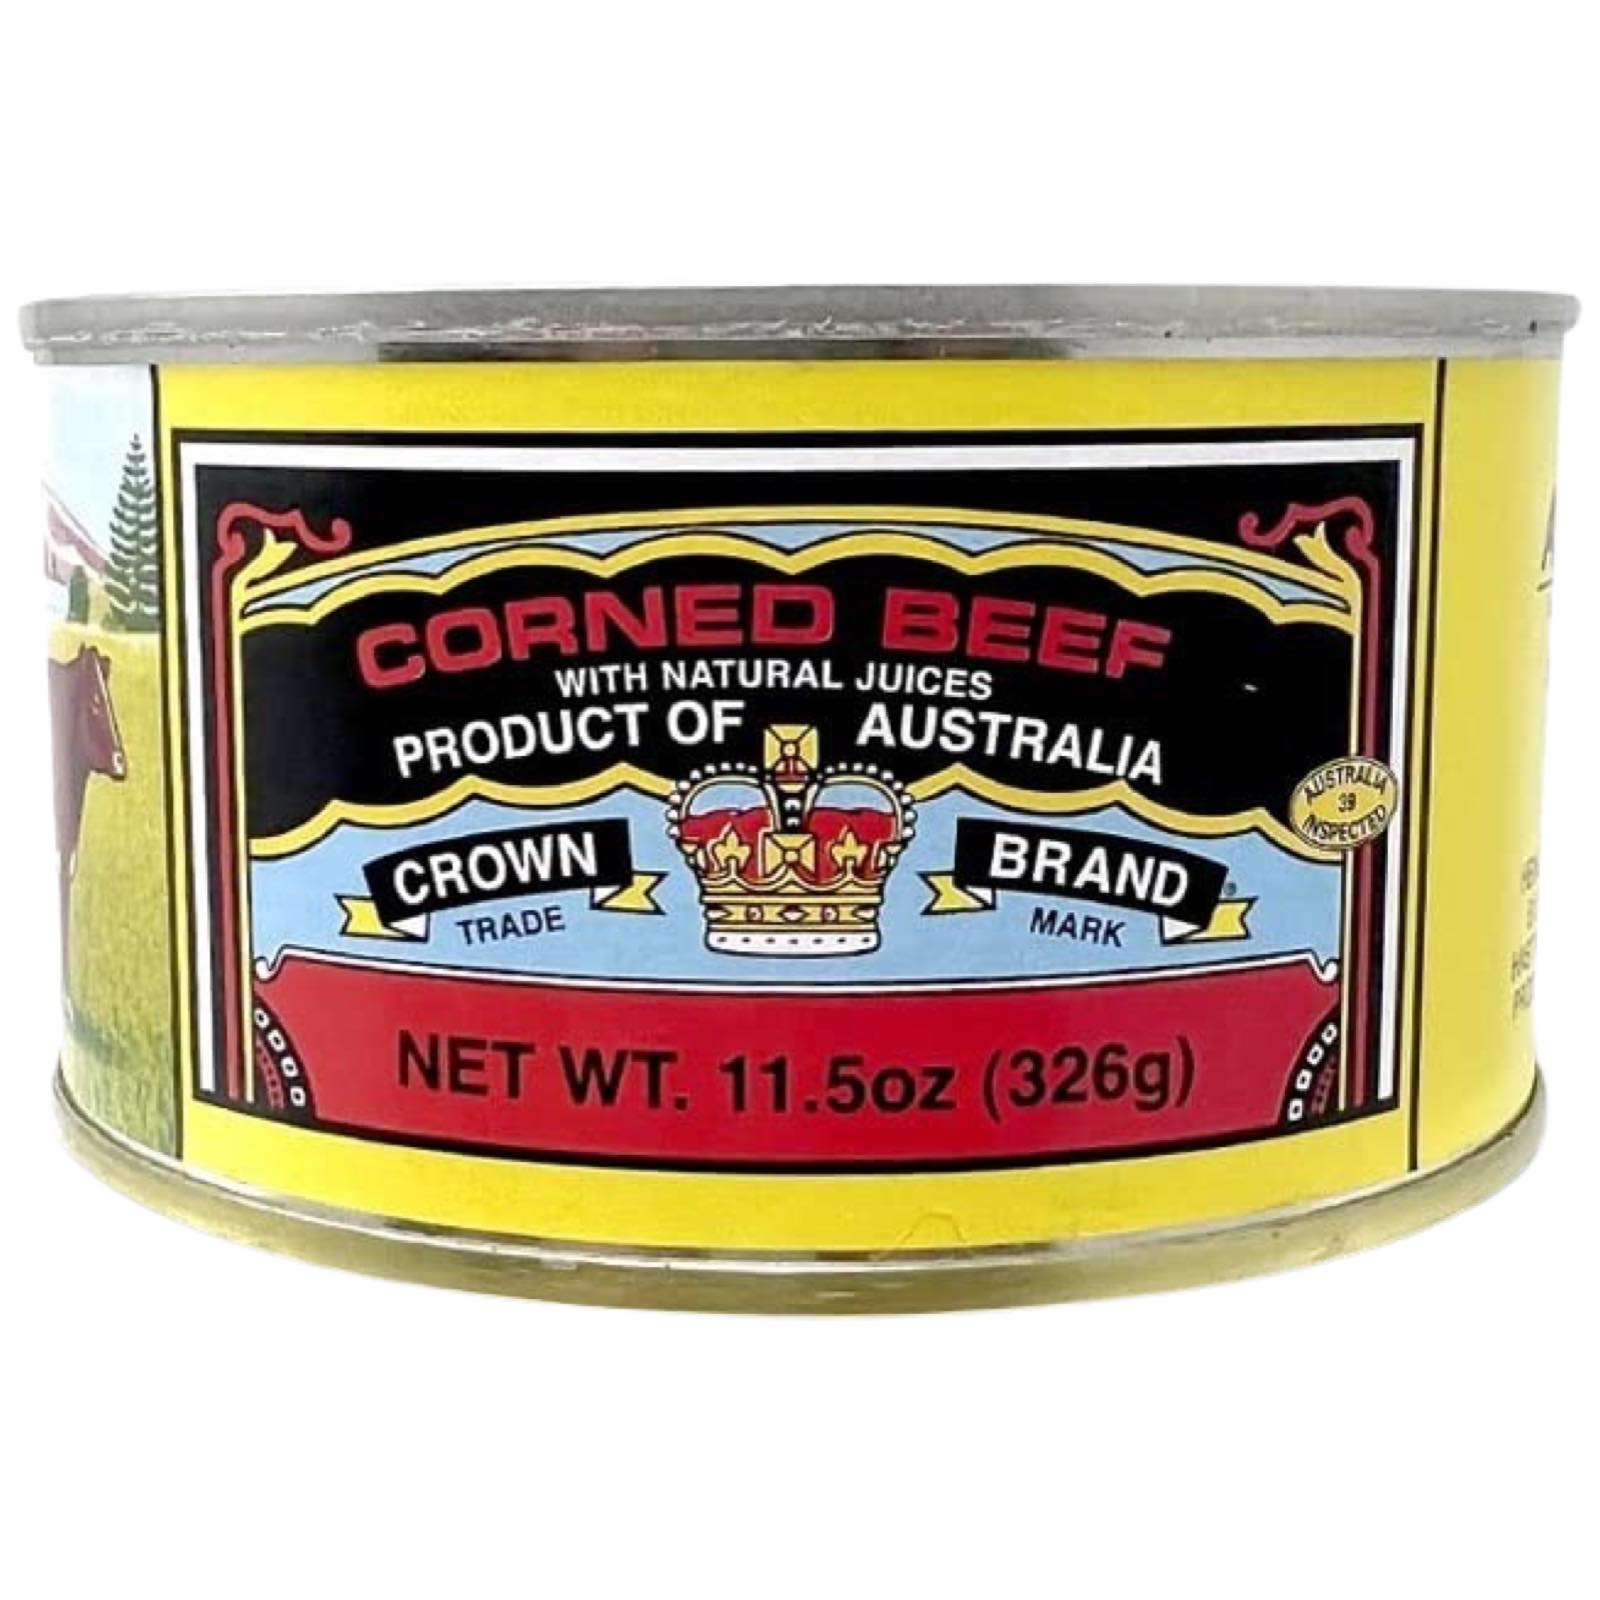 Crown Brand - Corned Beef with Natural Juices